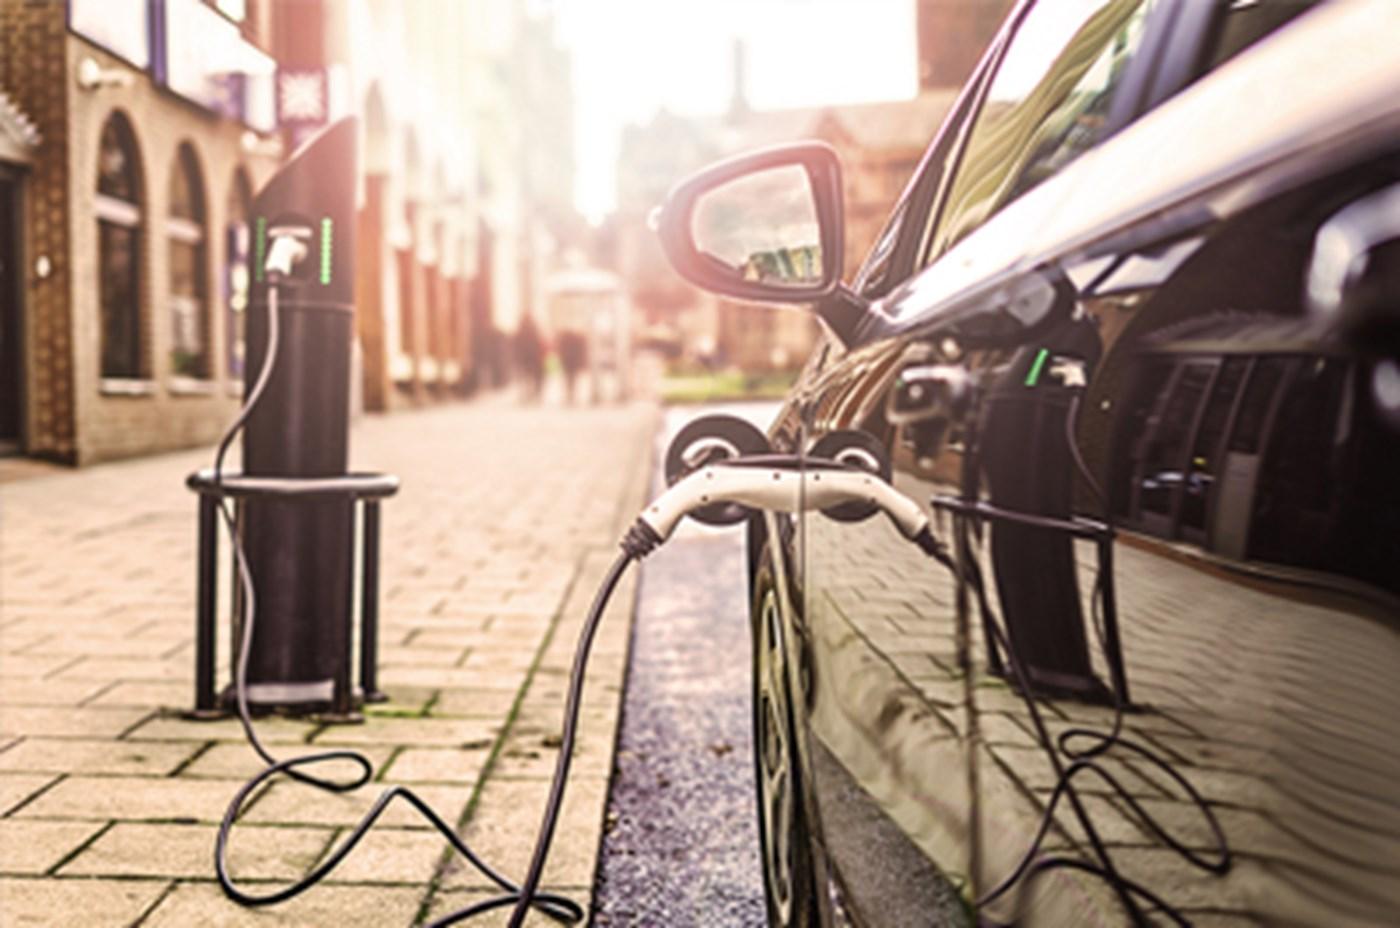 When will tax breaks for electric vehicles end?